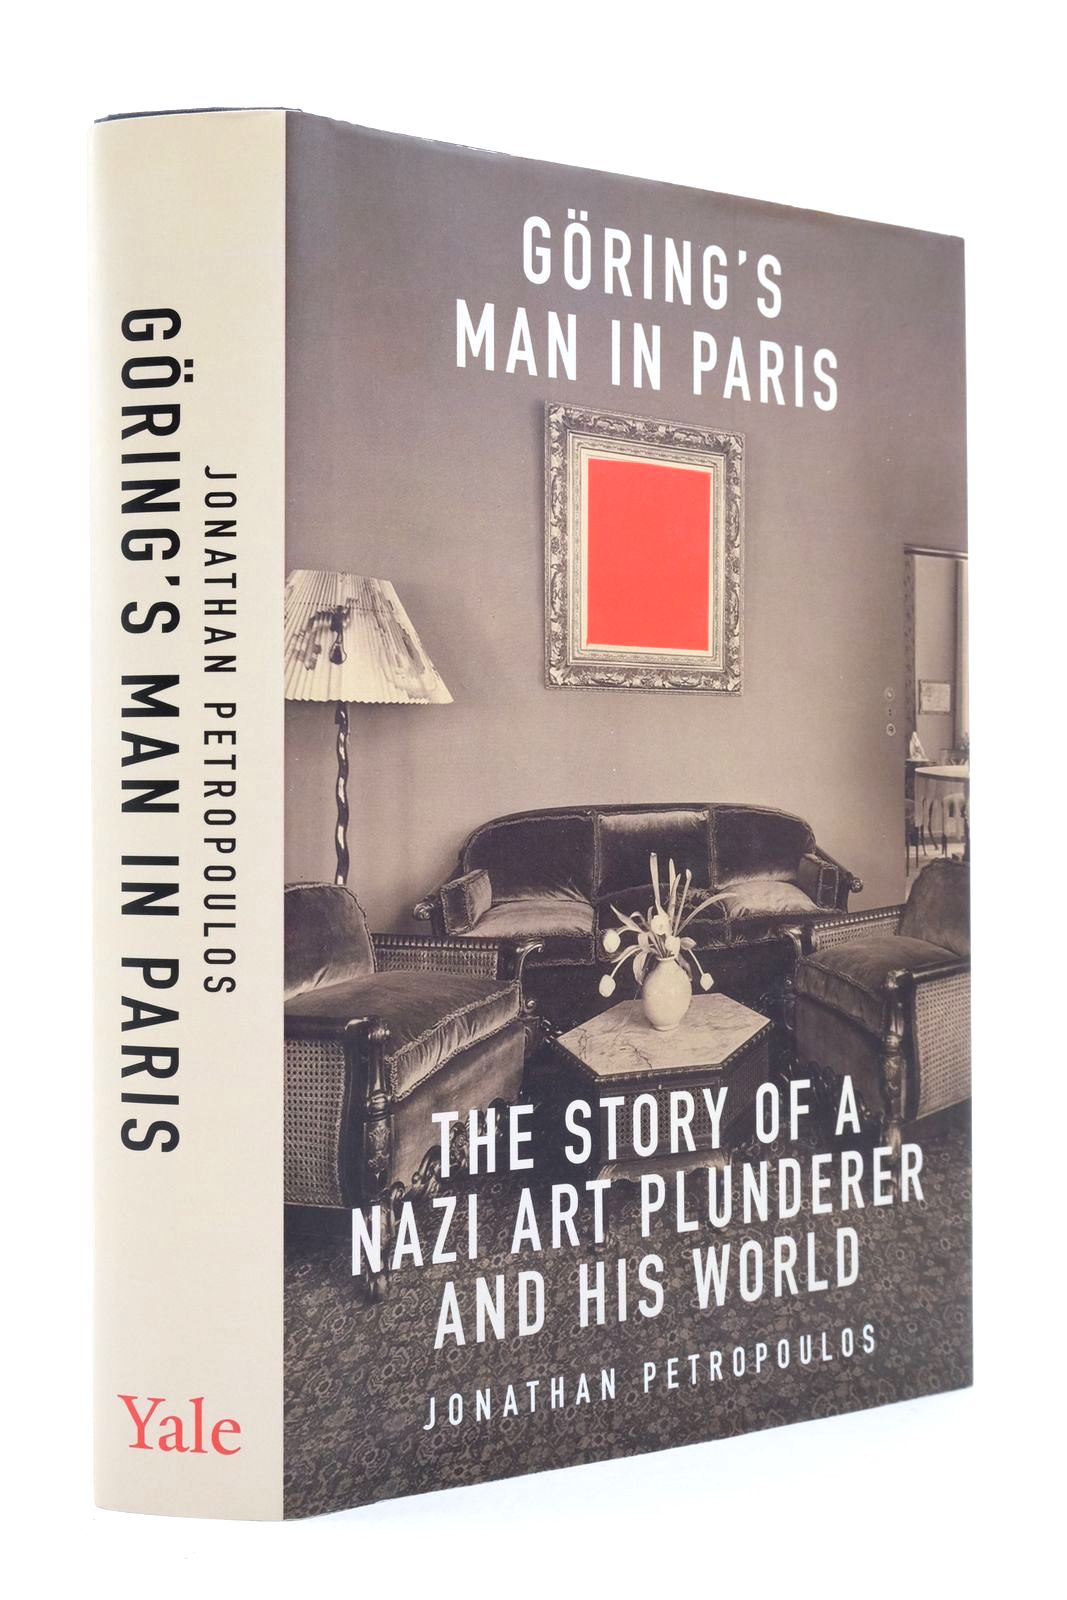 Photo of GORING'S MAN IN PARIS: THE STORY OF A NAZI ART PLUNDERER AND HIS WORLD written by Petropoulos, Jonathan published by Yale University Press (STOCK CODE: 2138826)  for sale by Stella & Rose's Books